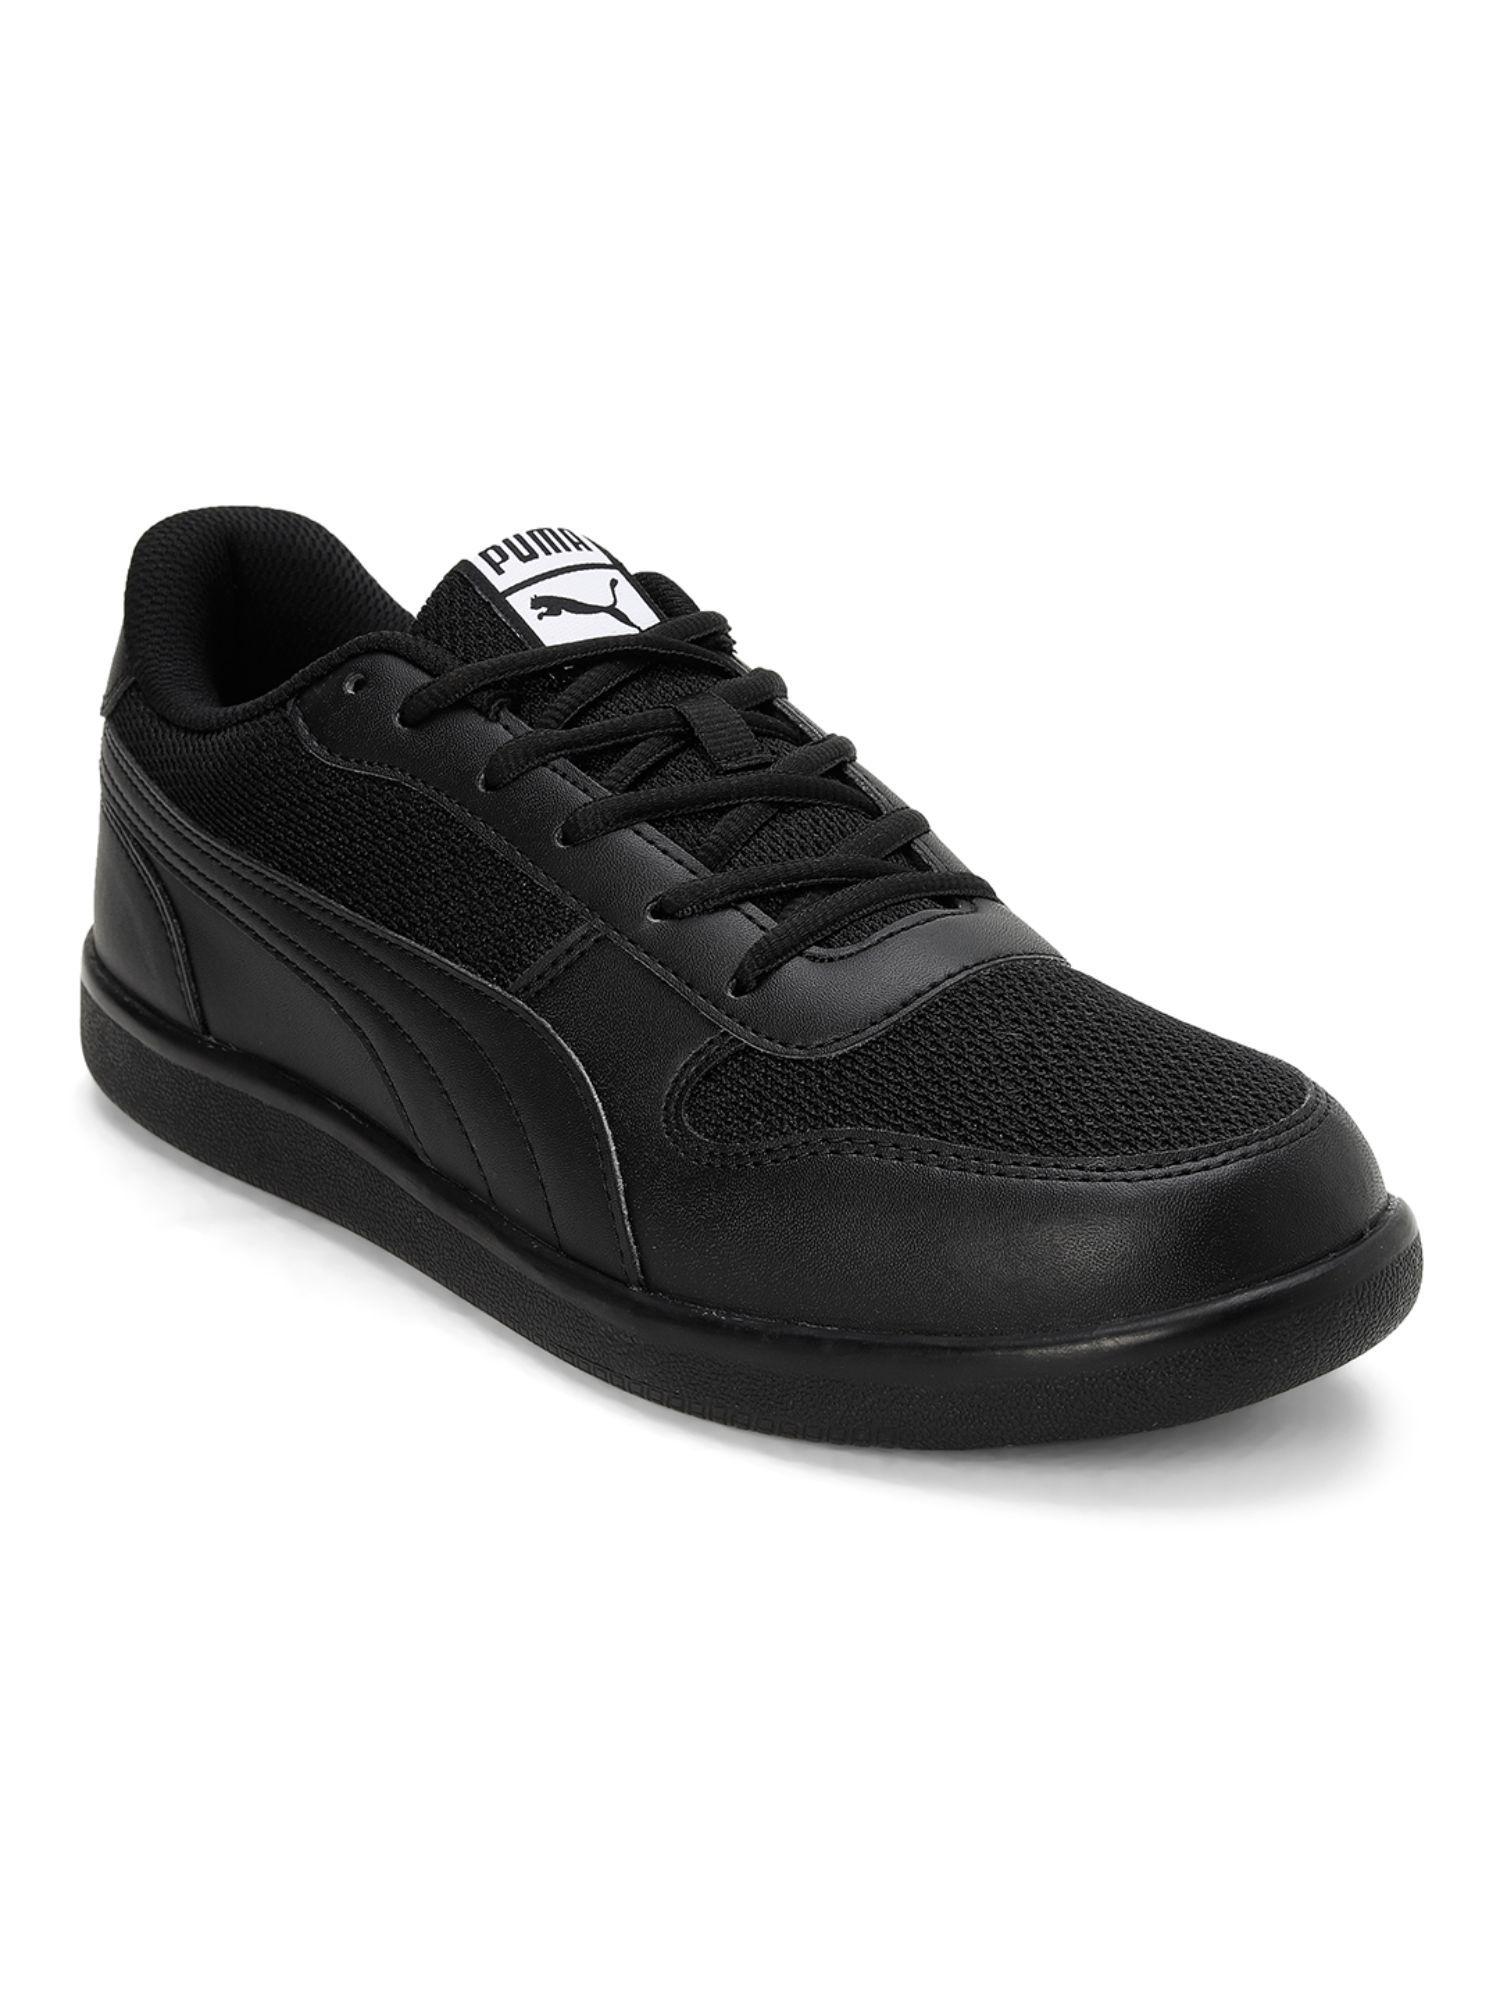 punch-comfort-kids-black-casual-shoes